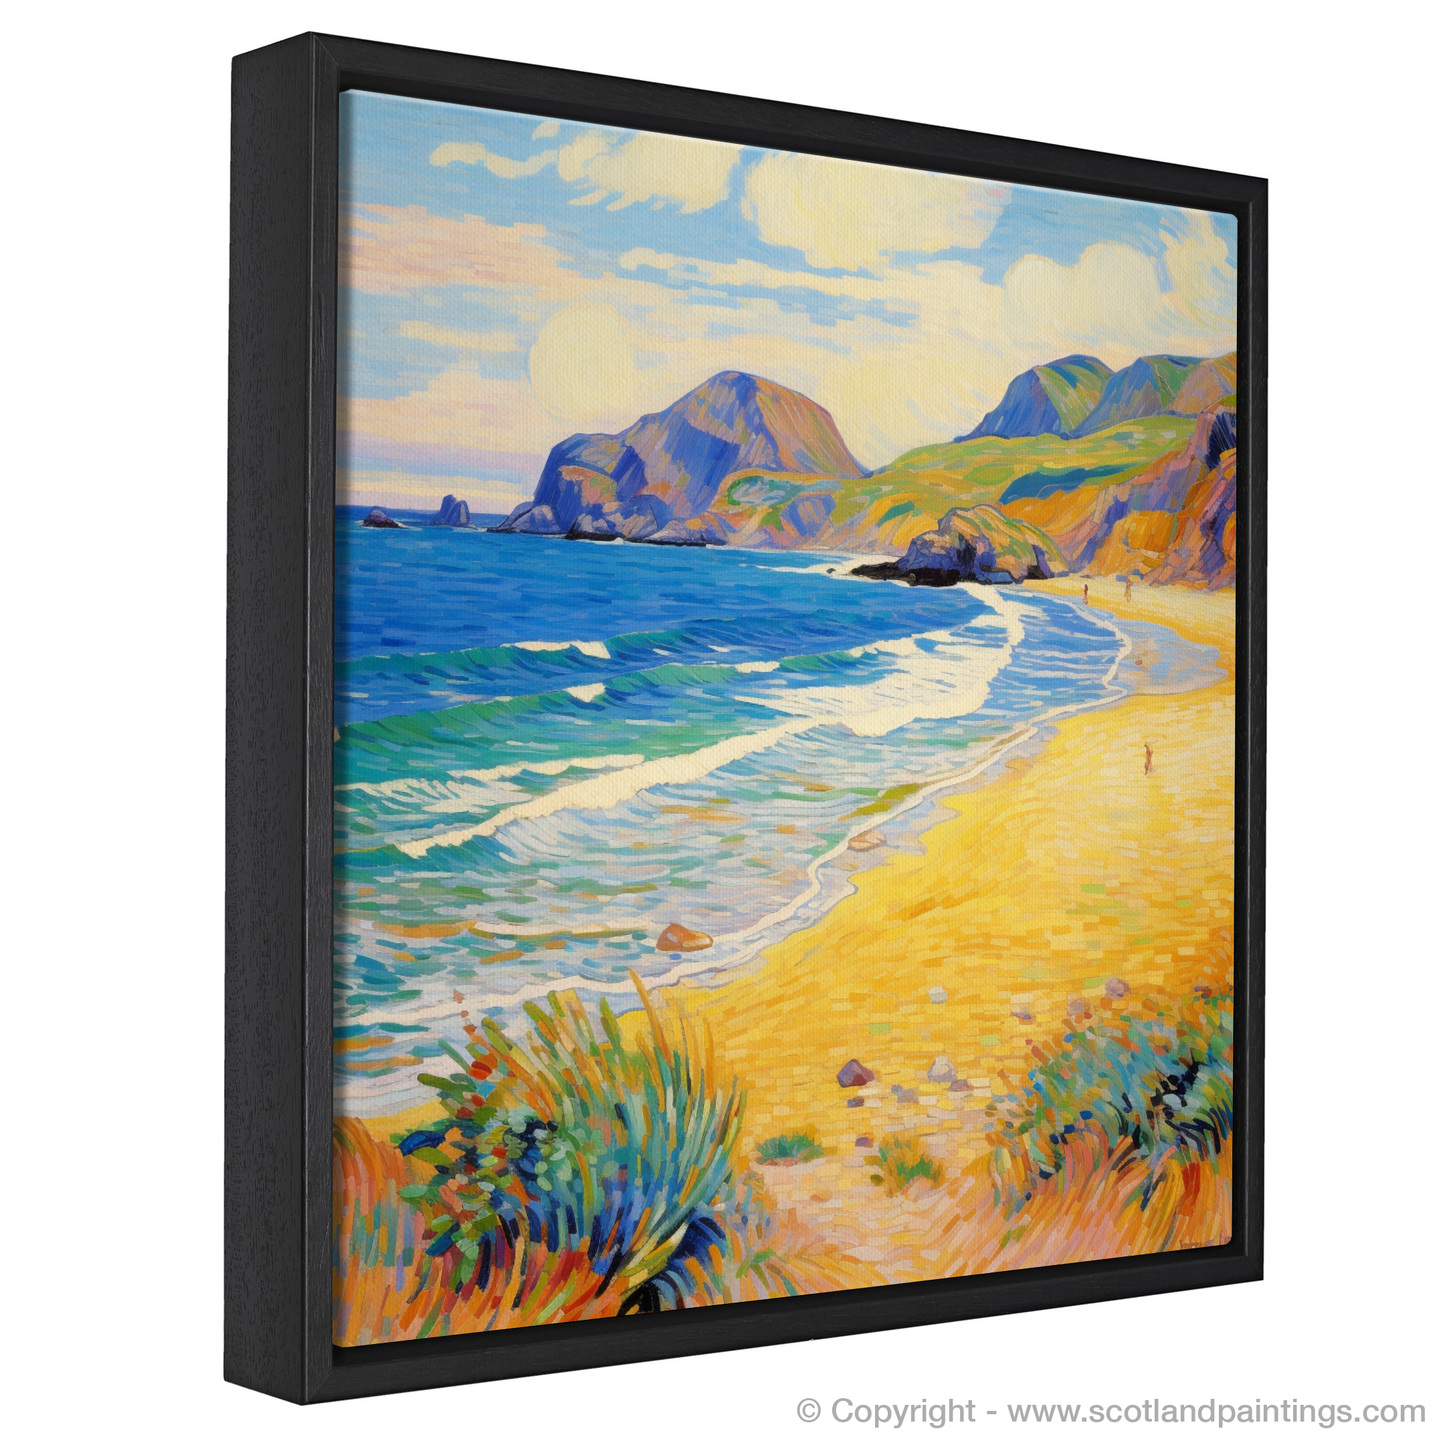 Painting and Art Print of Sandwood Bay, Sutherland in summer entitled "Impressionist Ode to Sandwood Bay Sutherland in Summer".